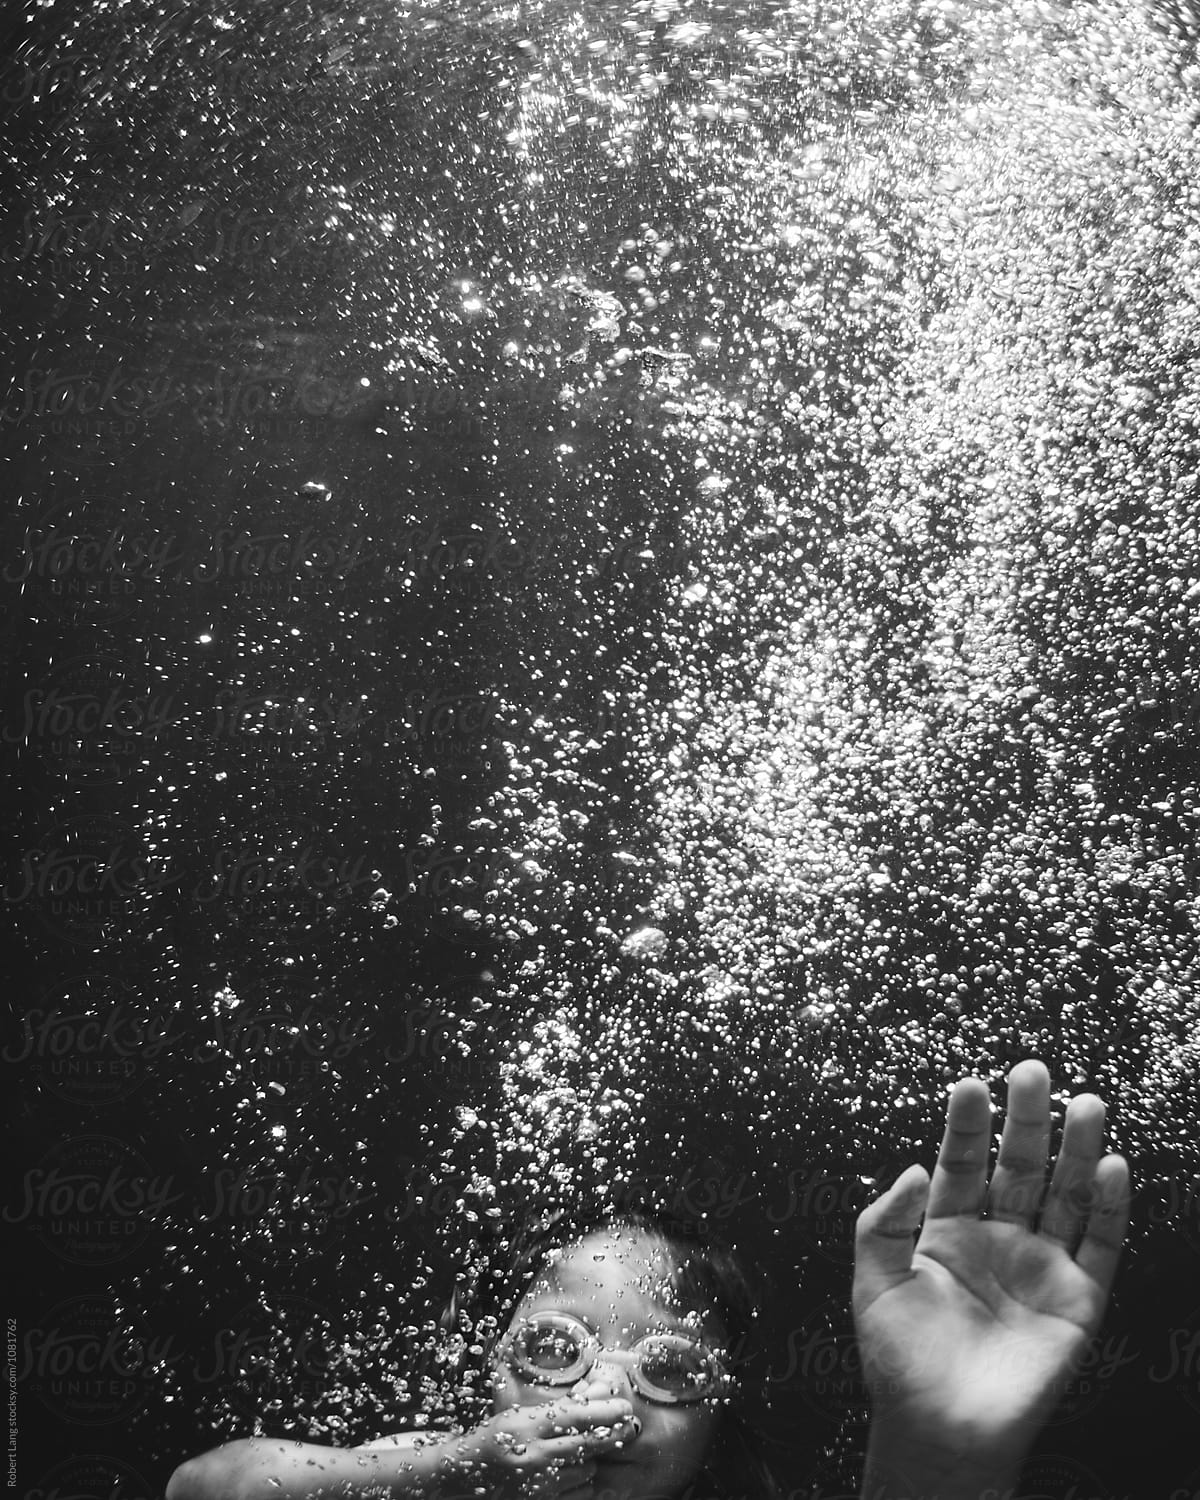 A child holds their nose and breath underwater surrounded by air bubbles